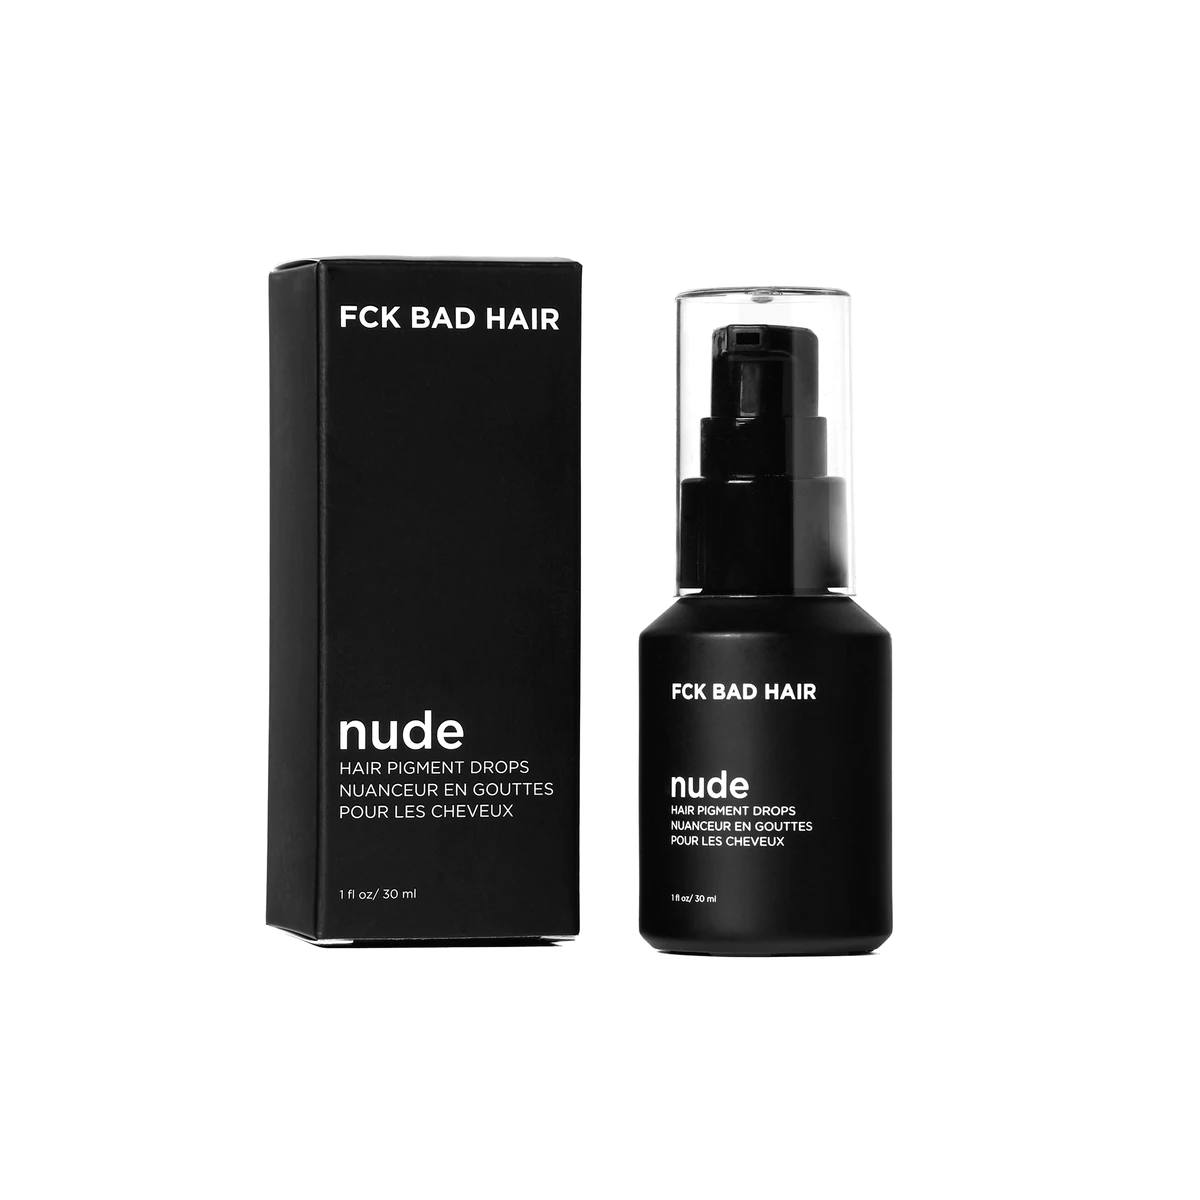 Nude Hair Pigment Drops